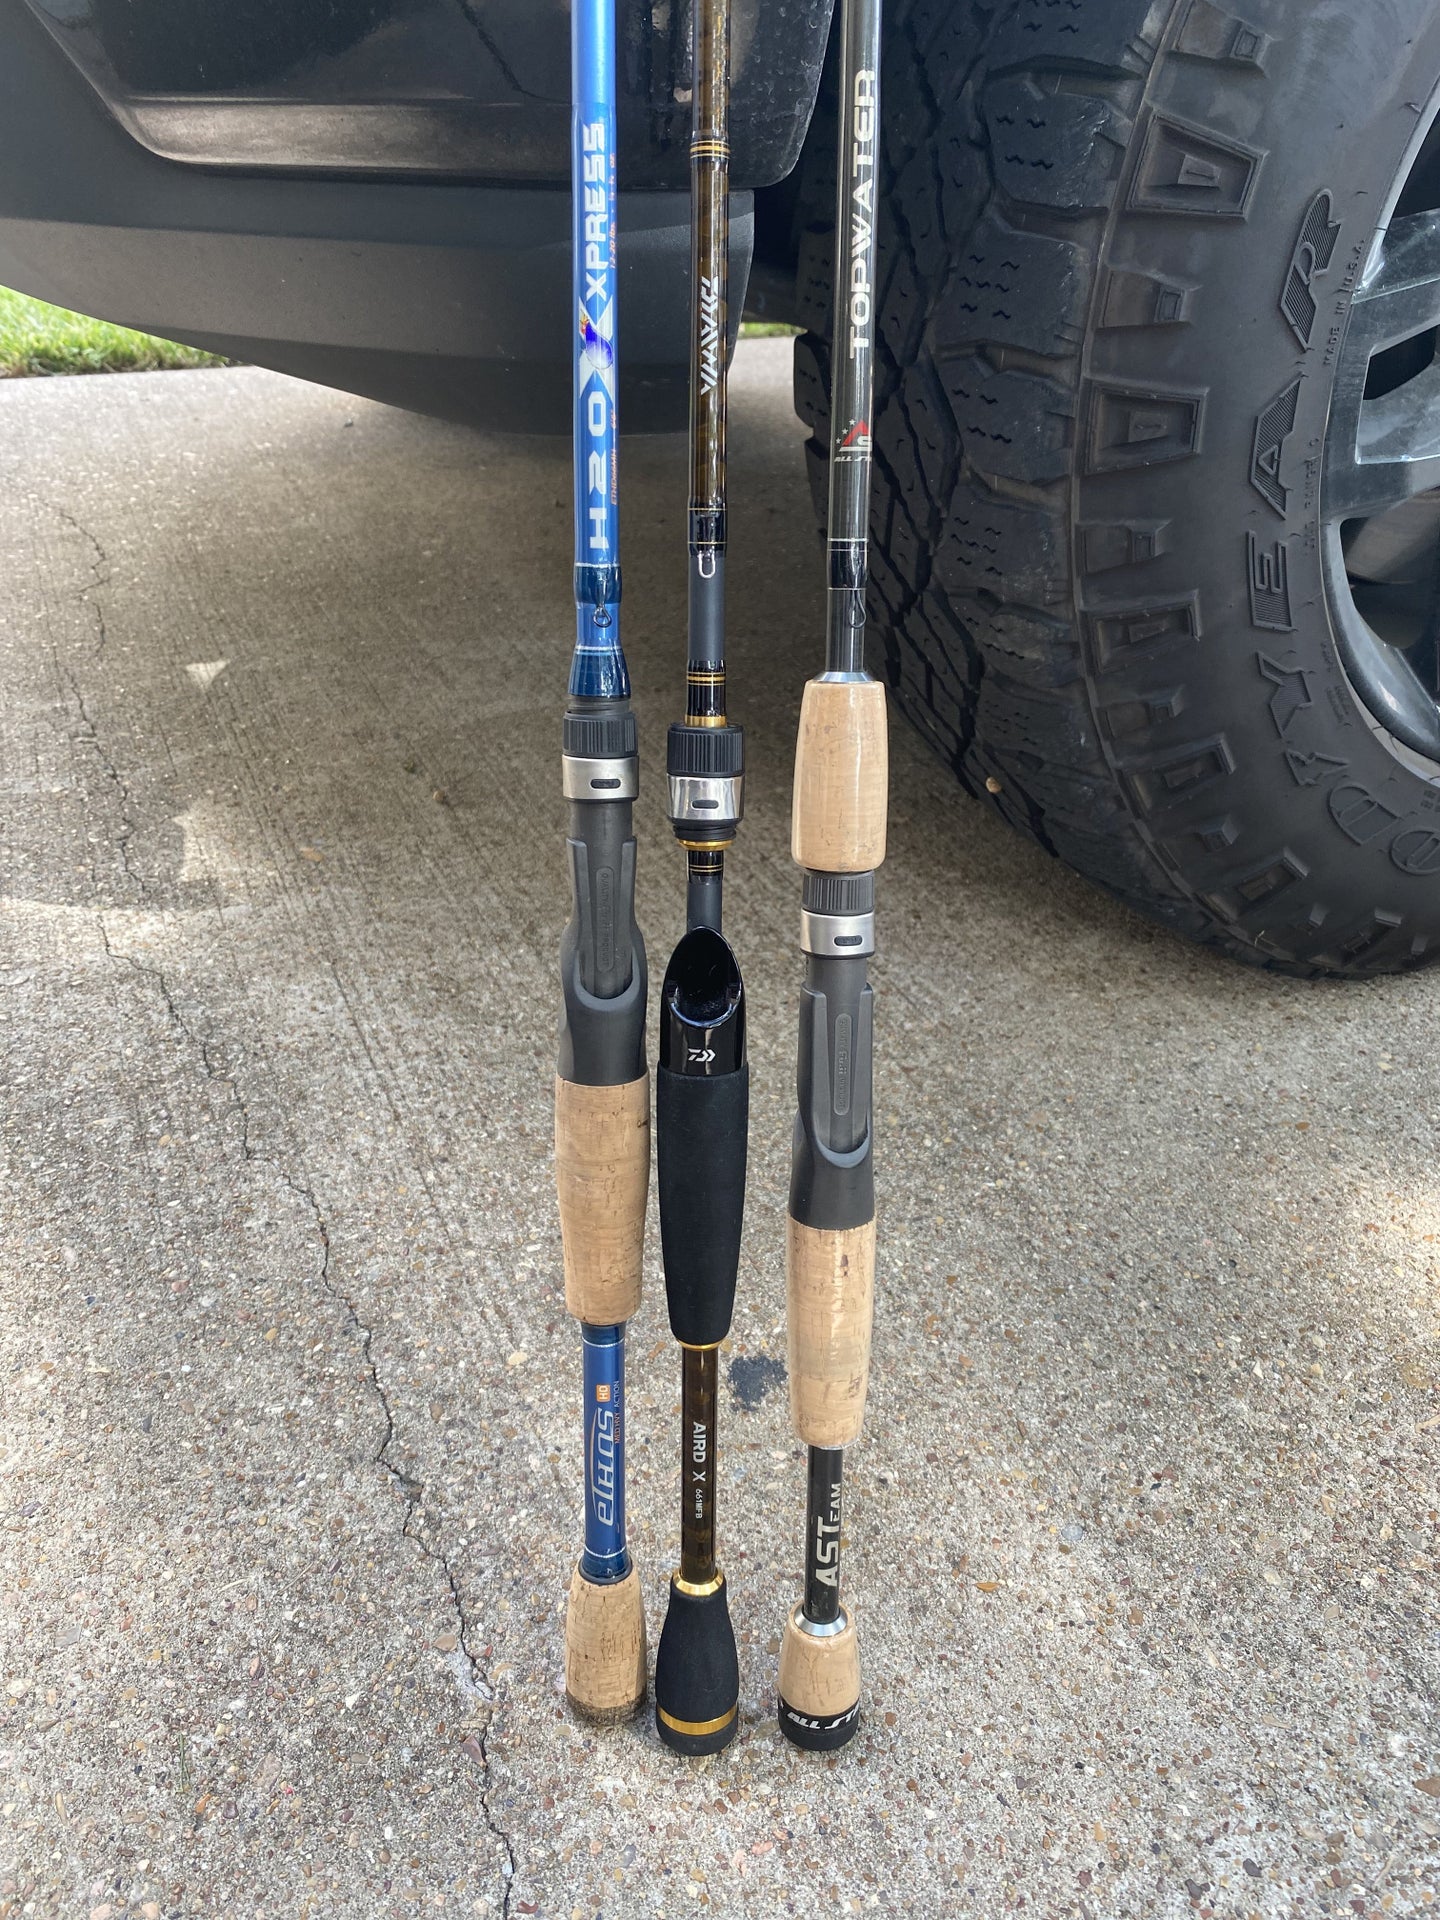 Fishing Rods, Bag, Lines, Lures, and Fishing Tools (Selling as Lot)